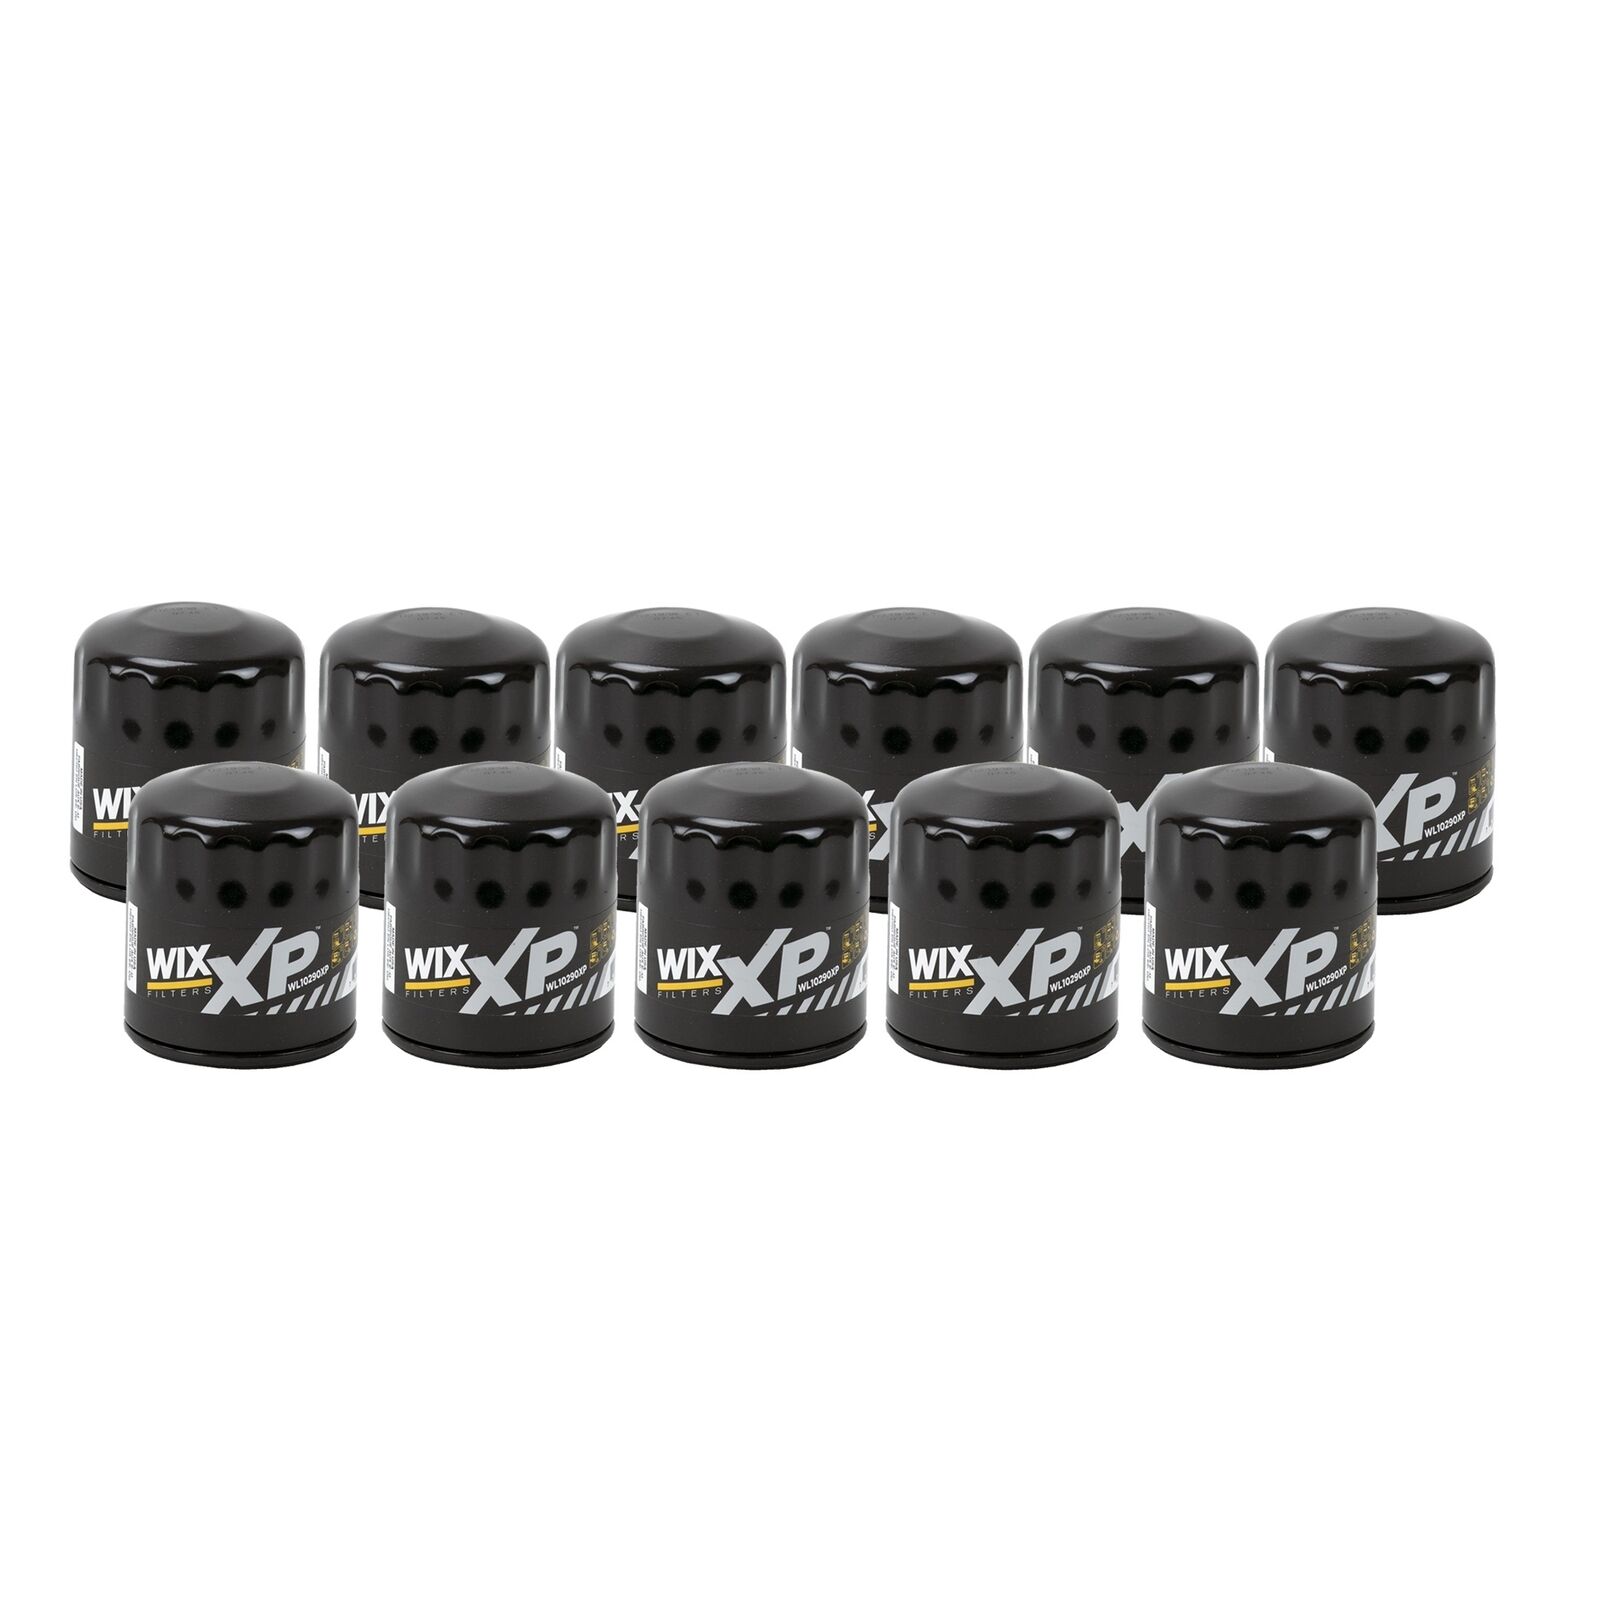 Wix Xp Set 11 Engine Motor Oil Filters For Buick Cadillac 